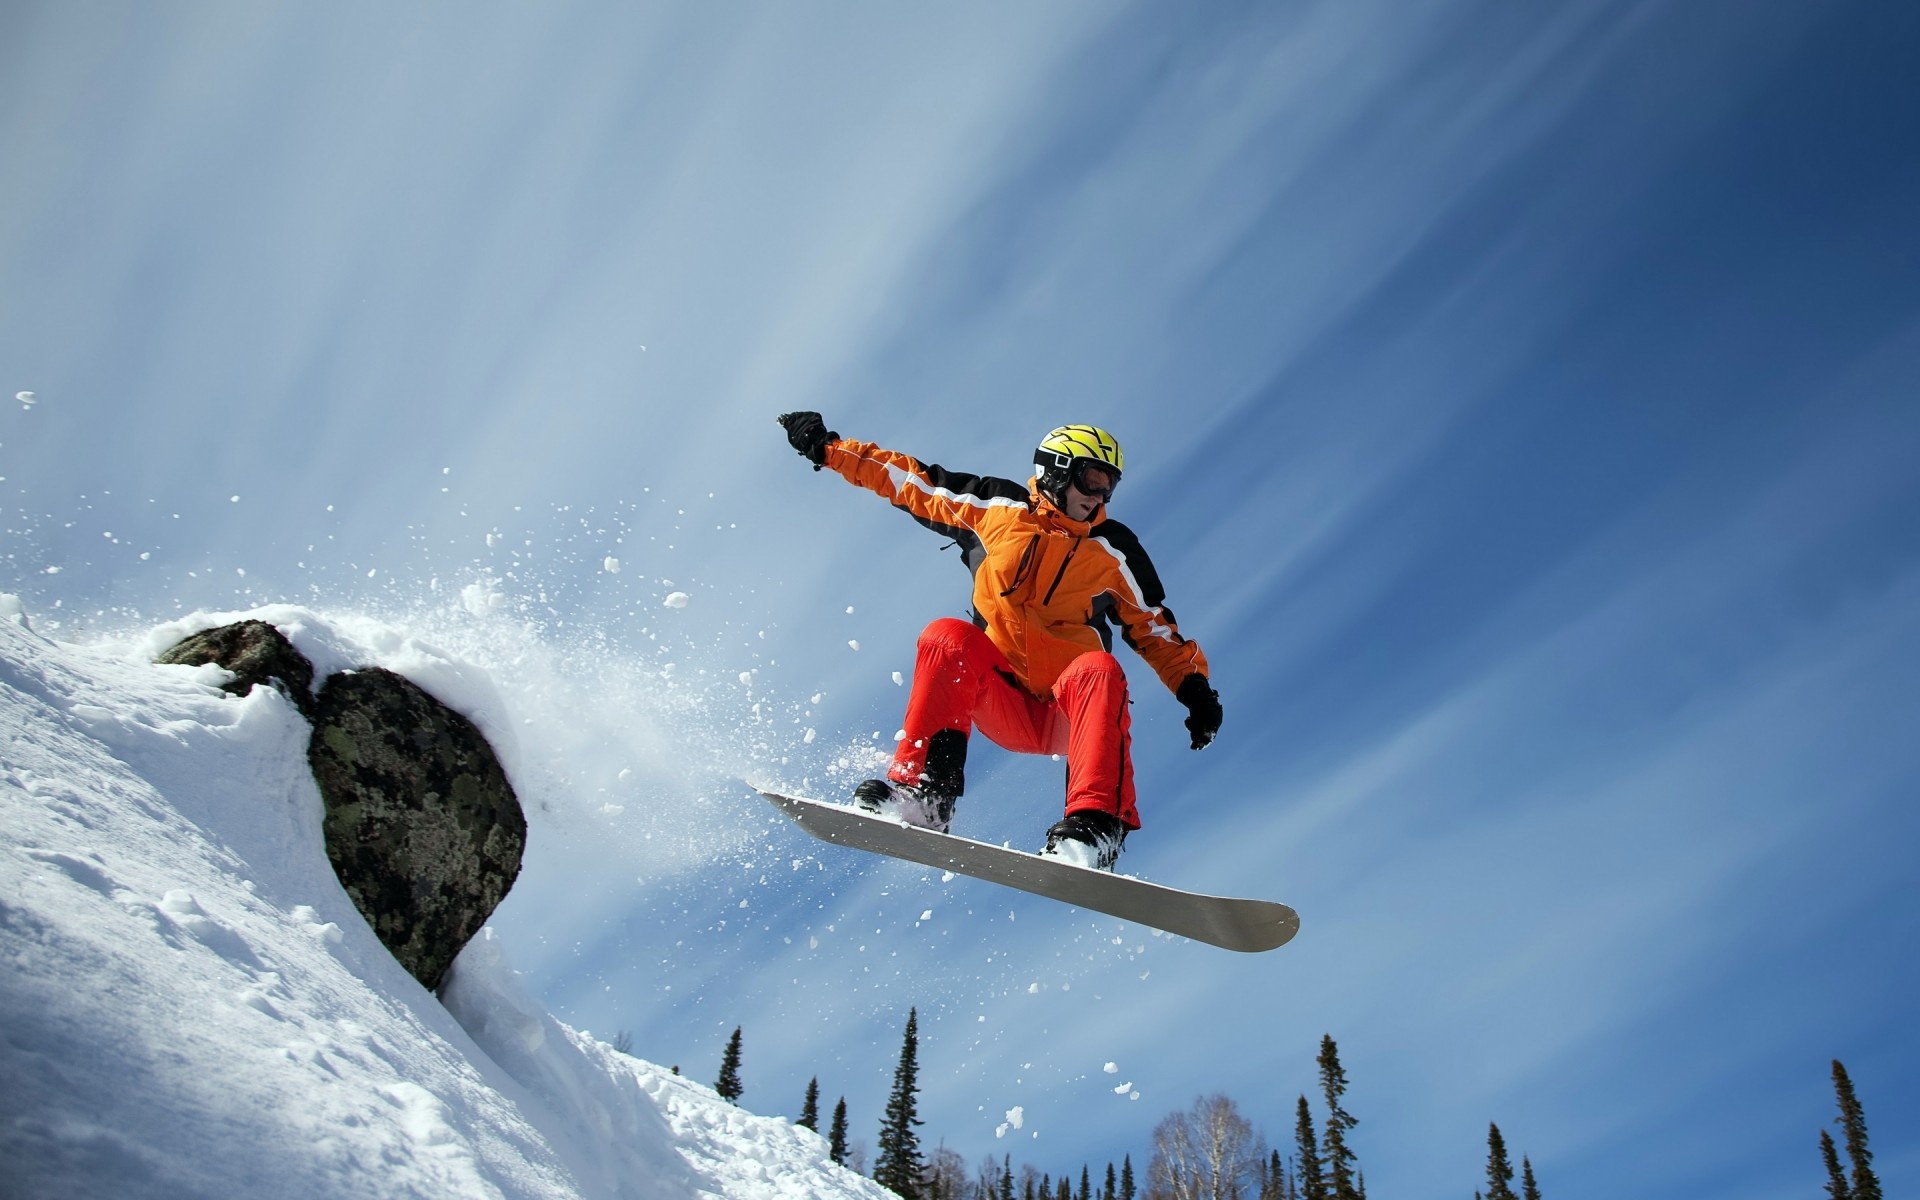 Snowboarding: Alpine and big air snowboarding combined style, High-injury-risk winter sports discipline. 1920x1200 HD Wallpaper.